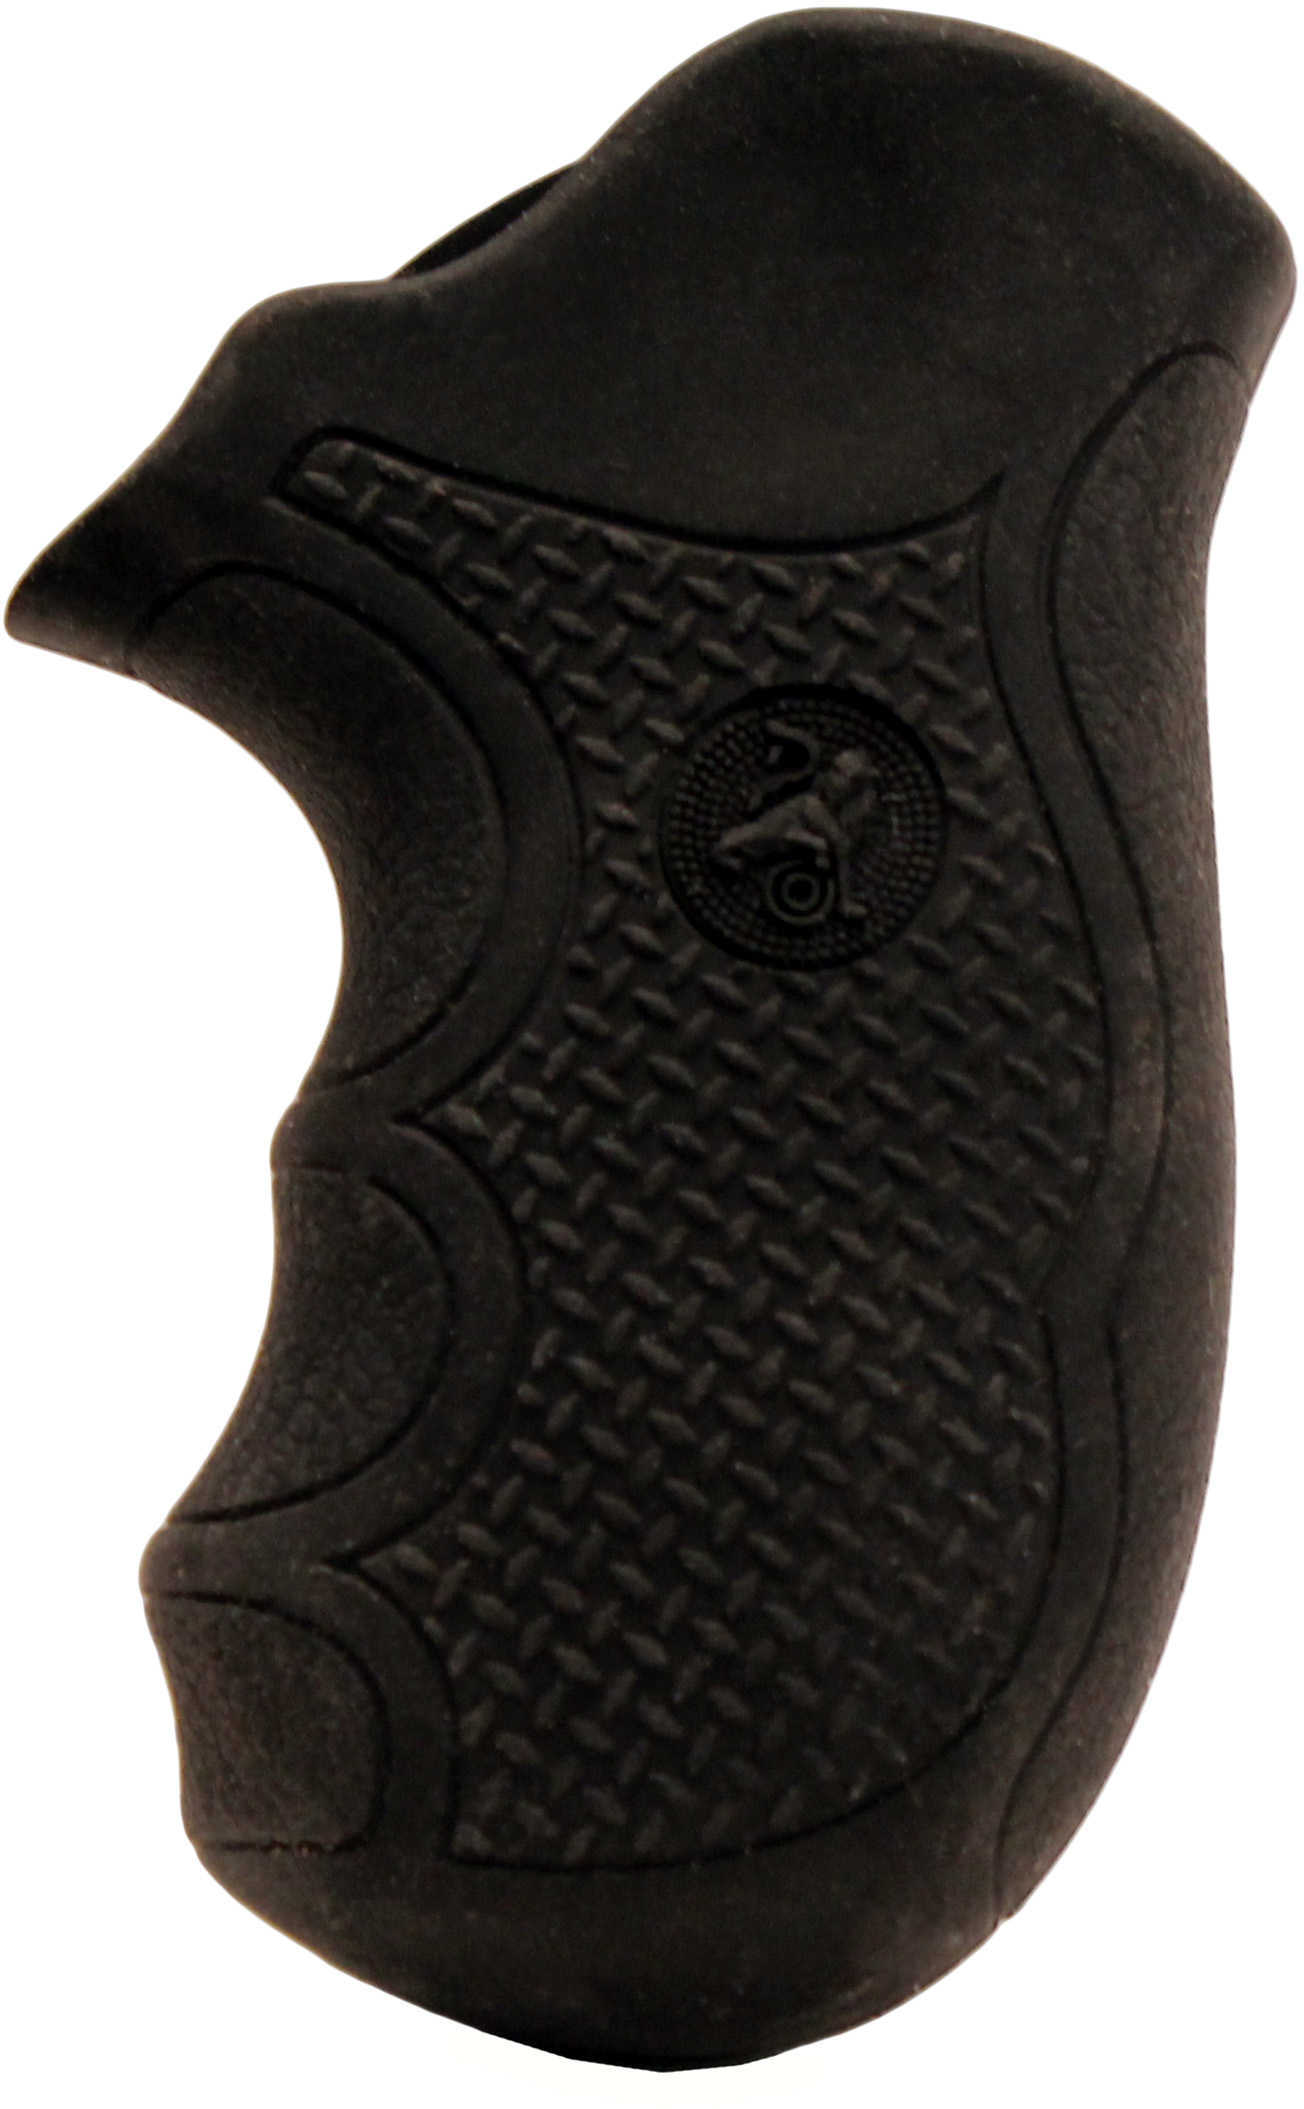 Pachmayr Diamond Pro Grip Ruger® SP101